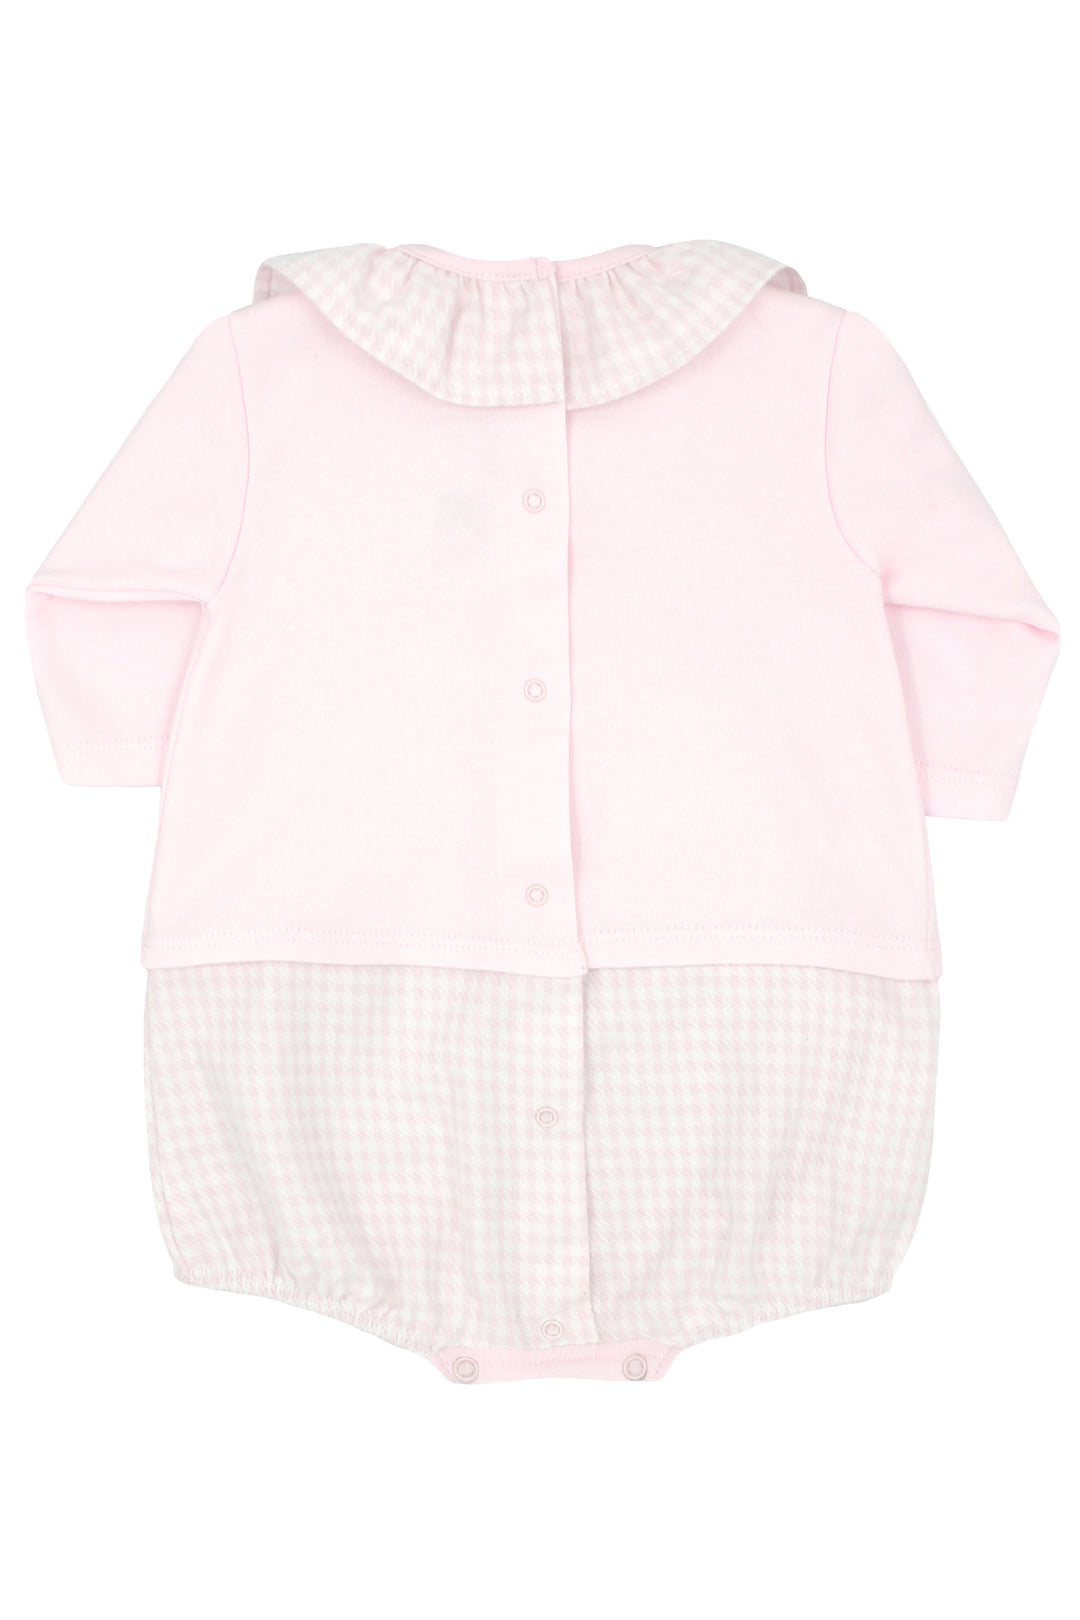 Rapife "Maryam" Pink Houndstooth Romper | Millie and John